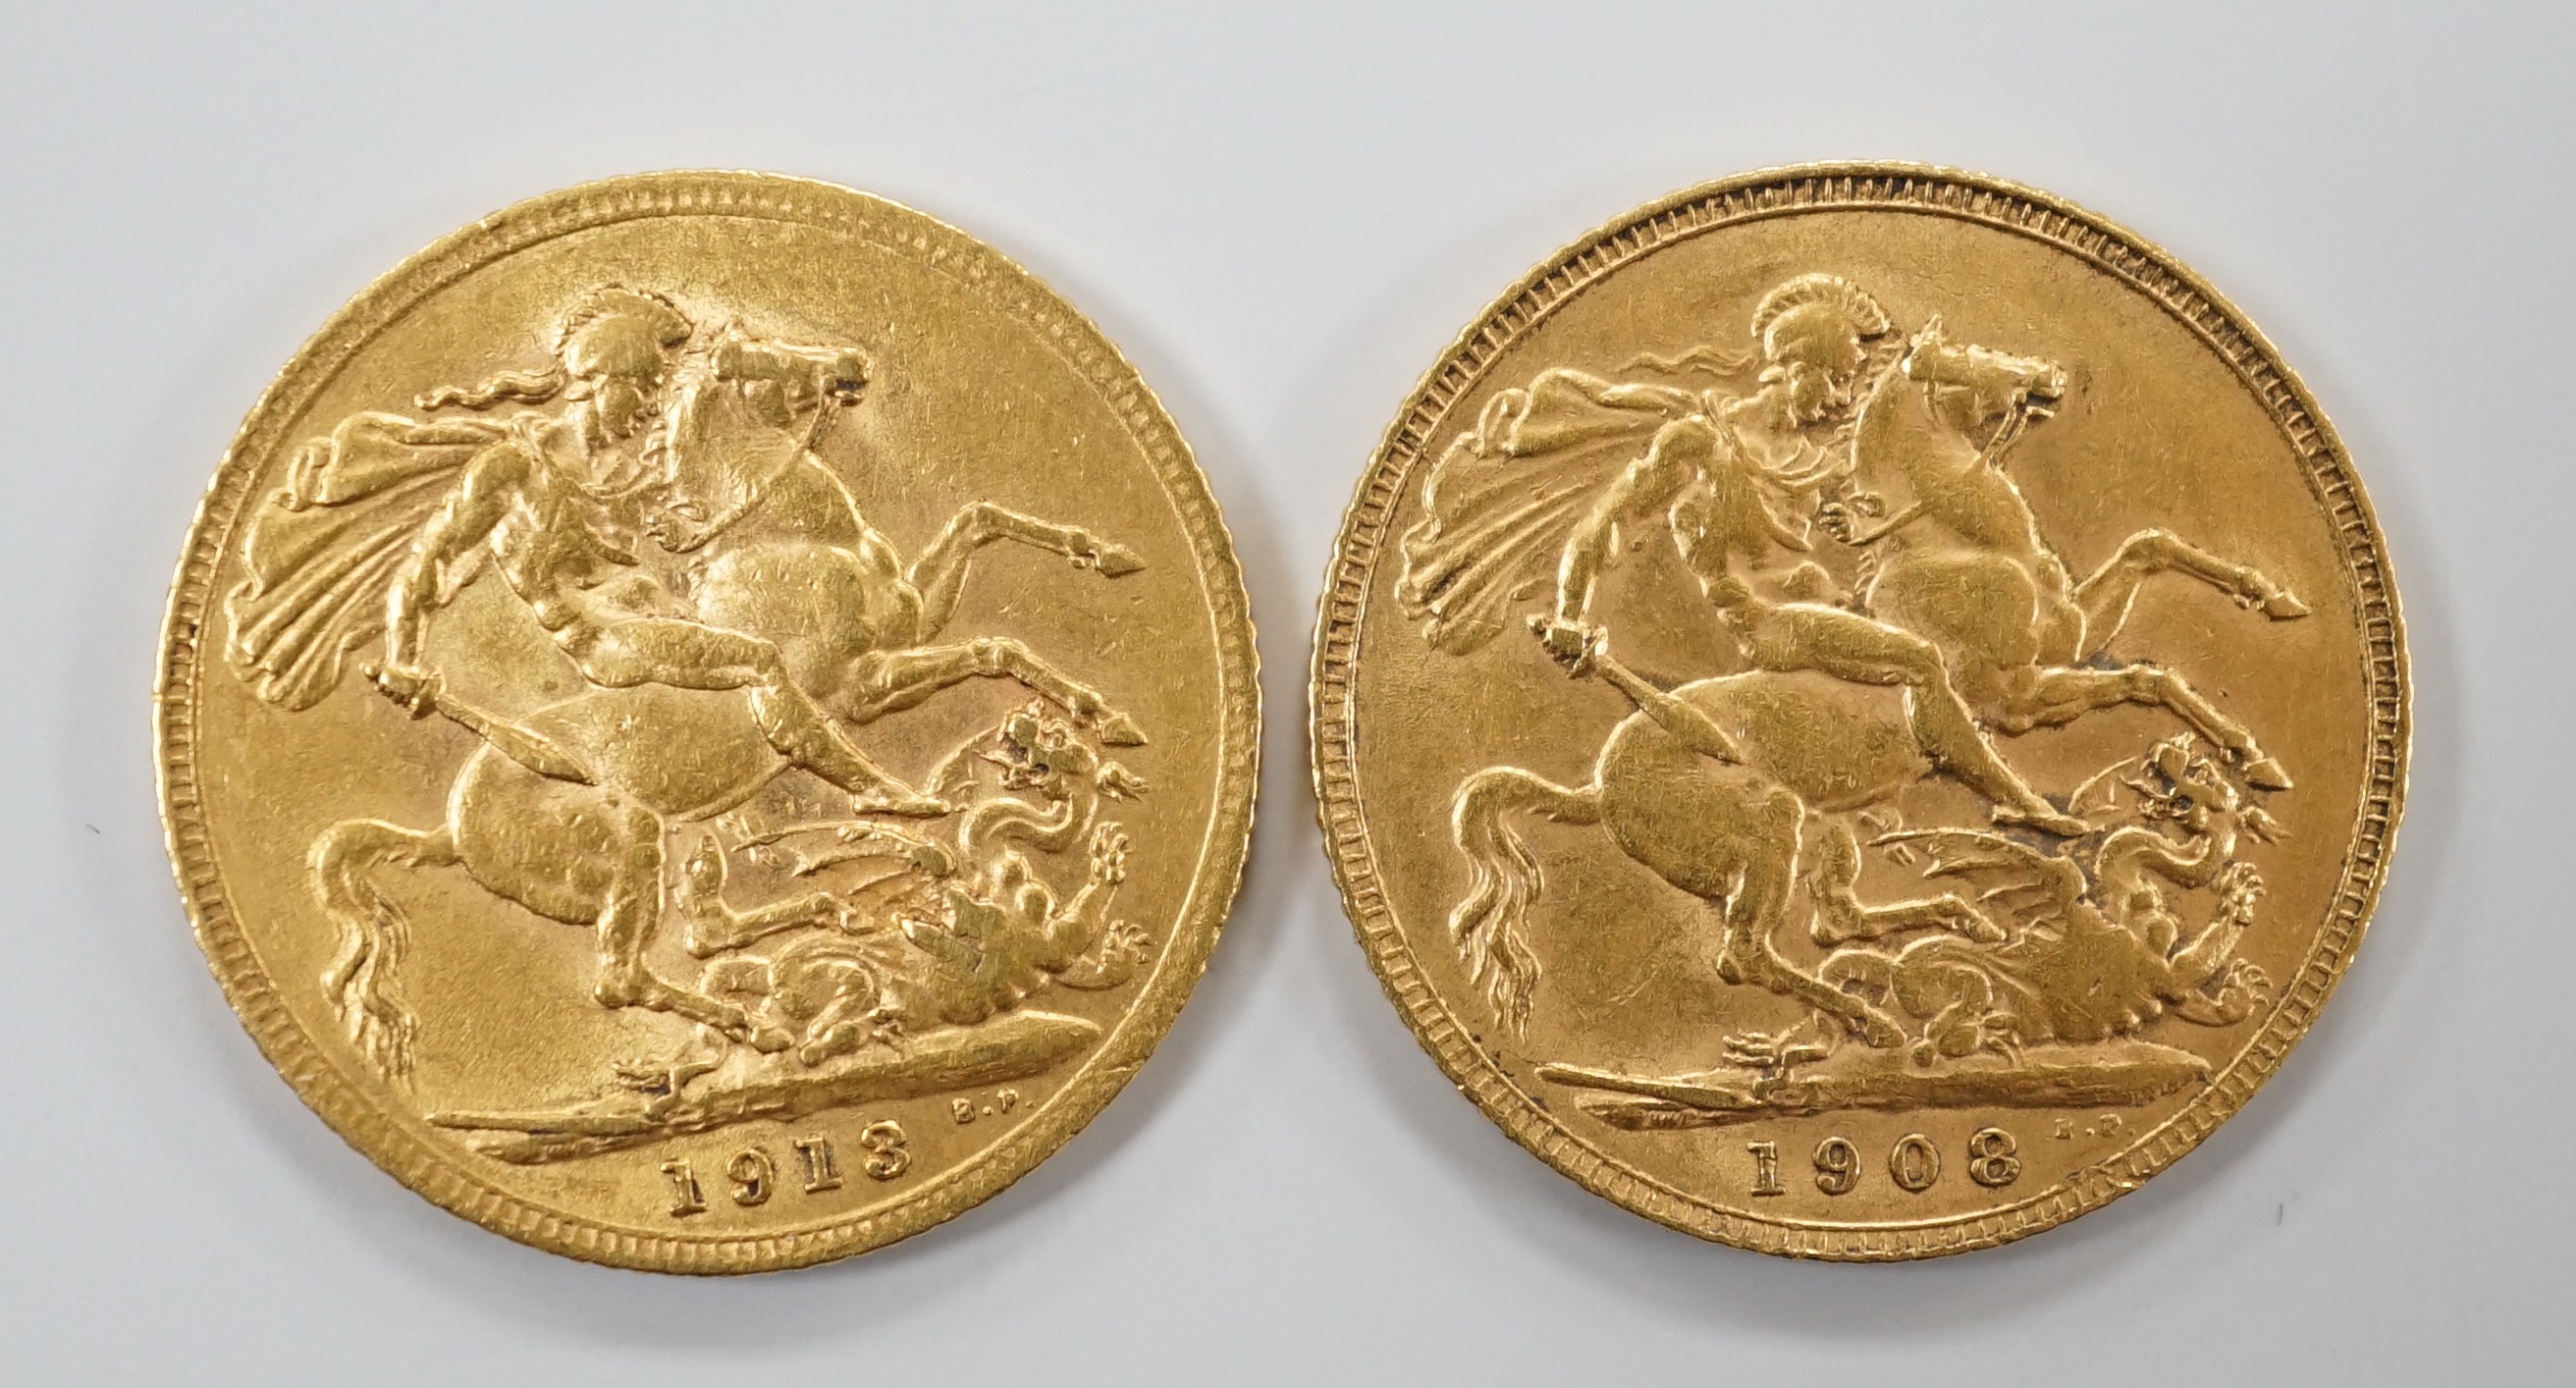 Two gold sovereigns, 1908 & 1913.